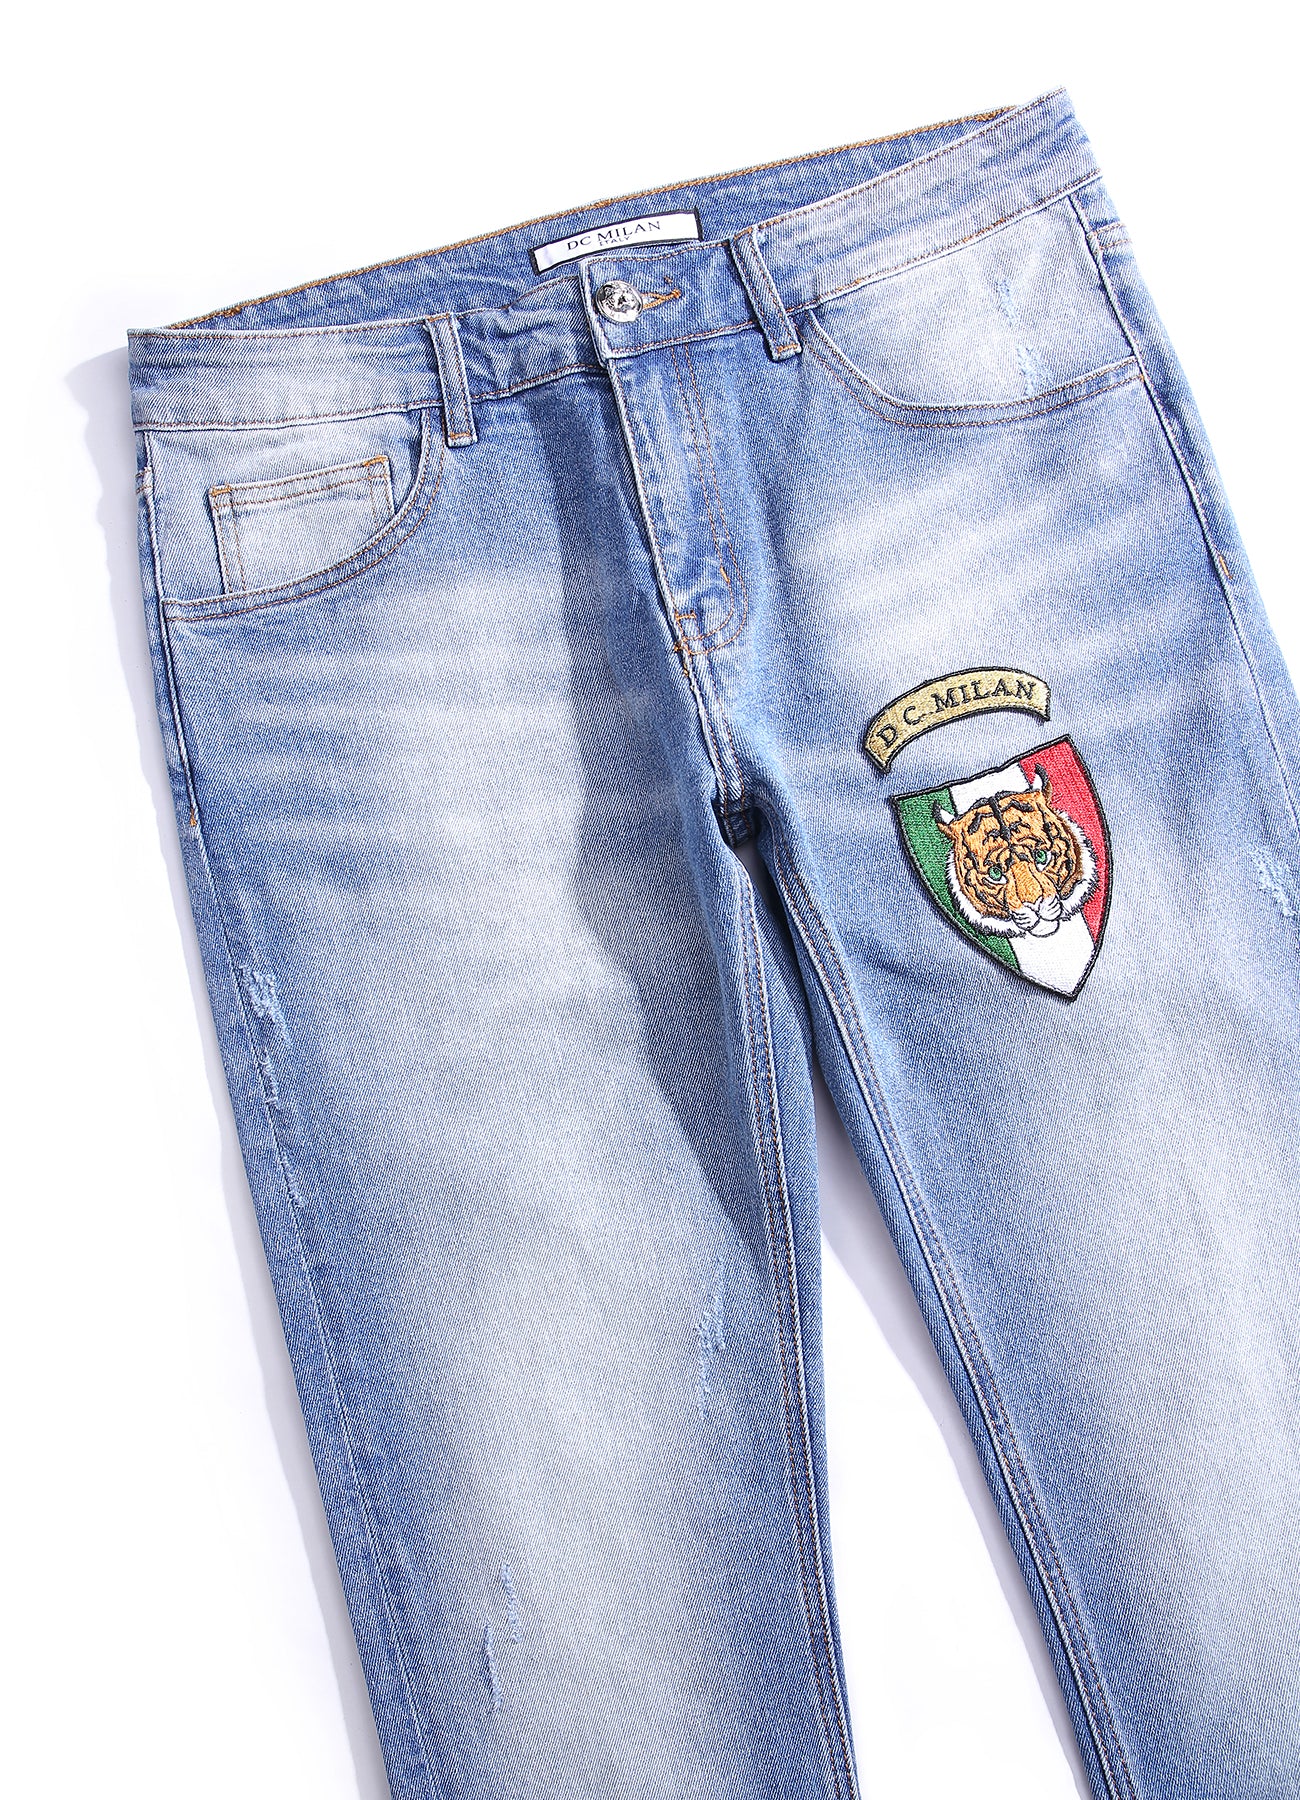 Light Blue Slim-Fit Jeans With 1 Logo